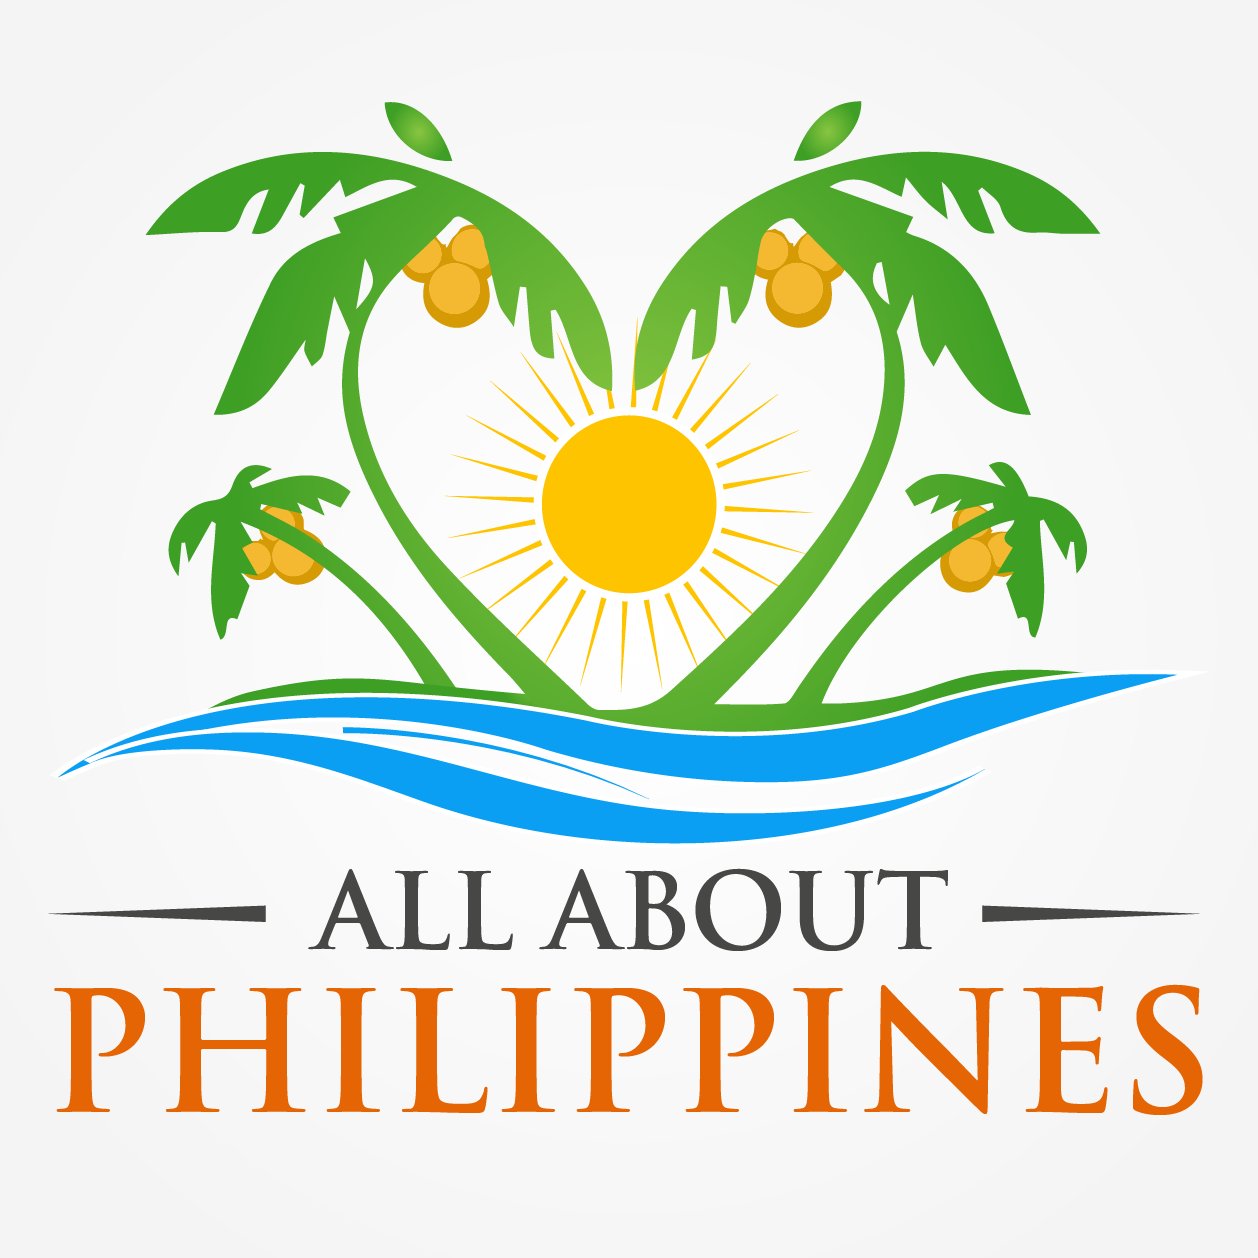 A blog about Philippines, its beauty, customs, traditions, an so on